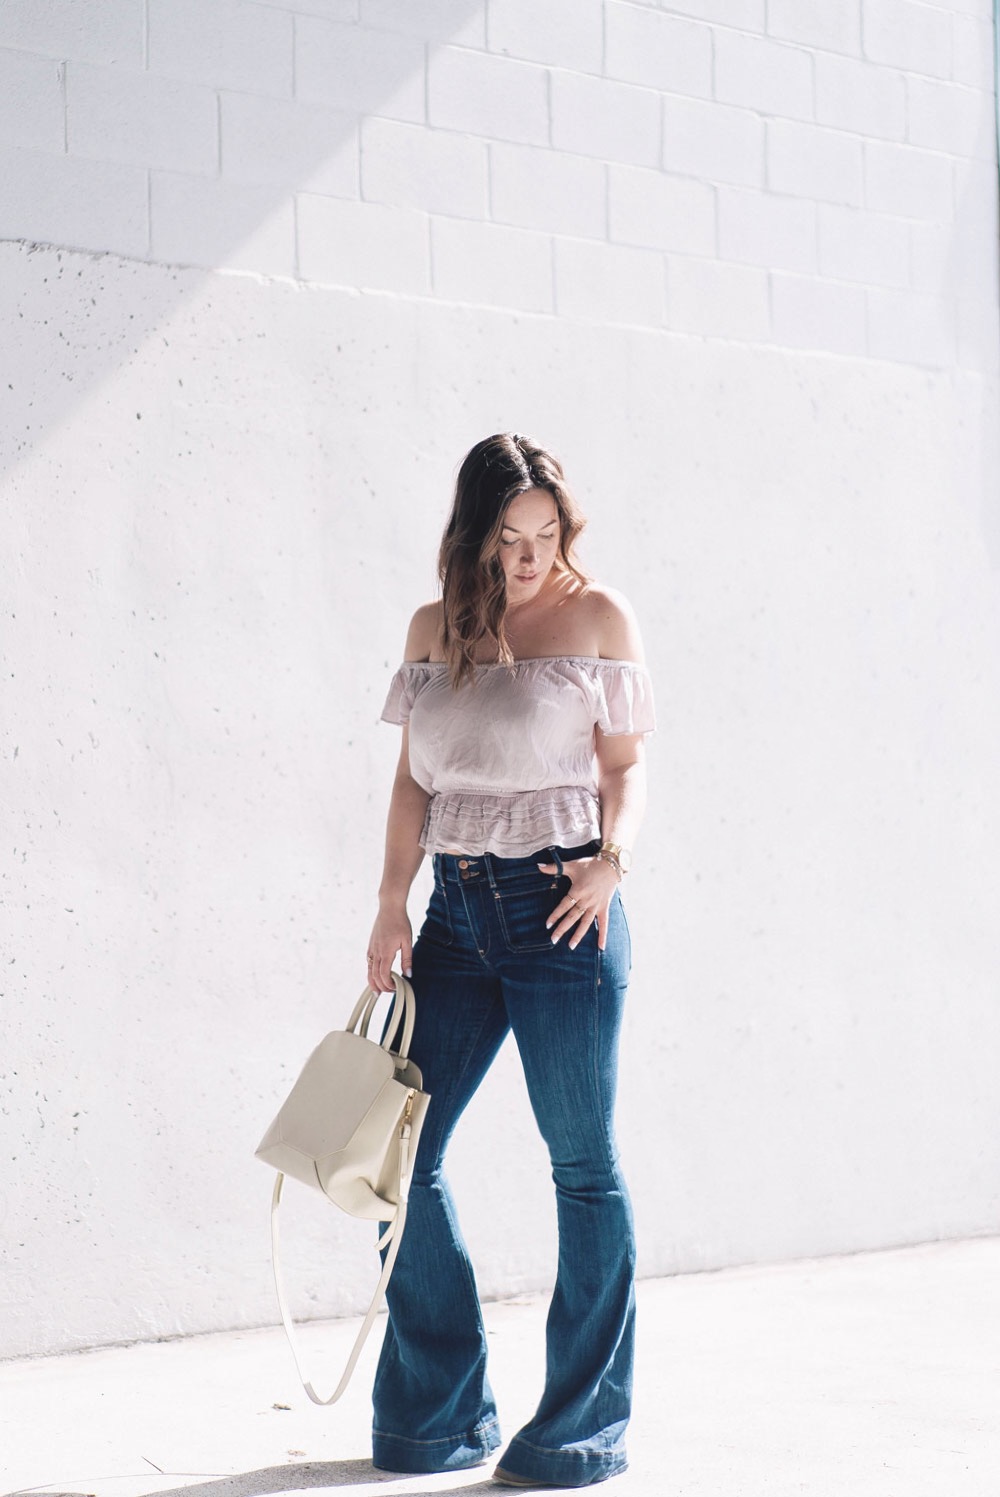 How to wear ruffles, Spring 2017 fashion trends, how to wear off the shoulder tops, Aritzia top, Express flare jeans, how to wear flare jeans by To Vogue or Bust